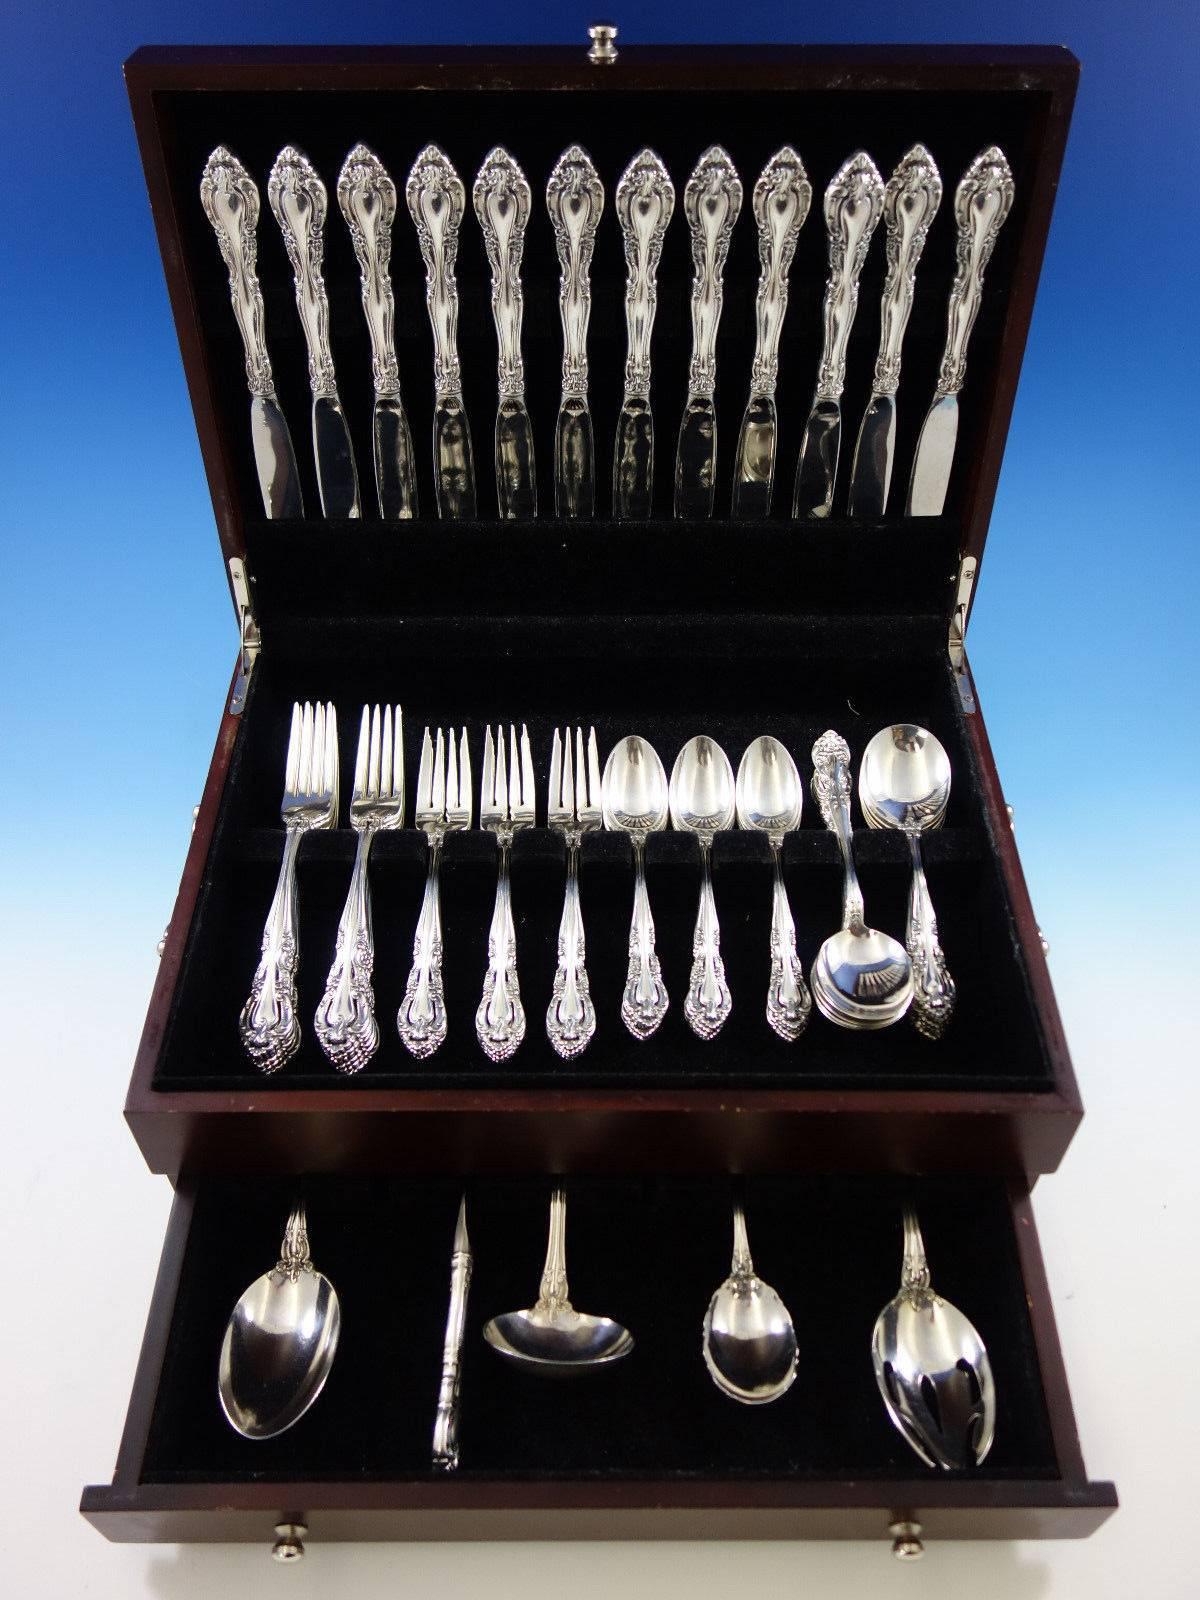 Place size Baronial (1973) by Gorham sterling silver flatware set, 65 pieces. This set includes: 12 place size knives, 9 1/4